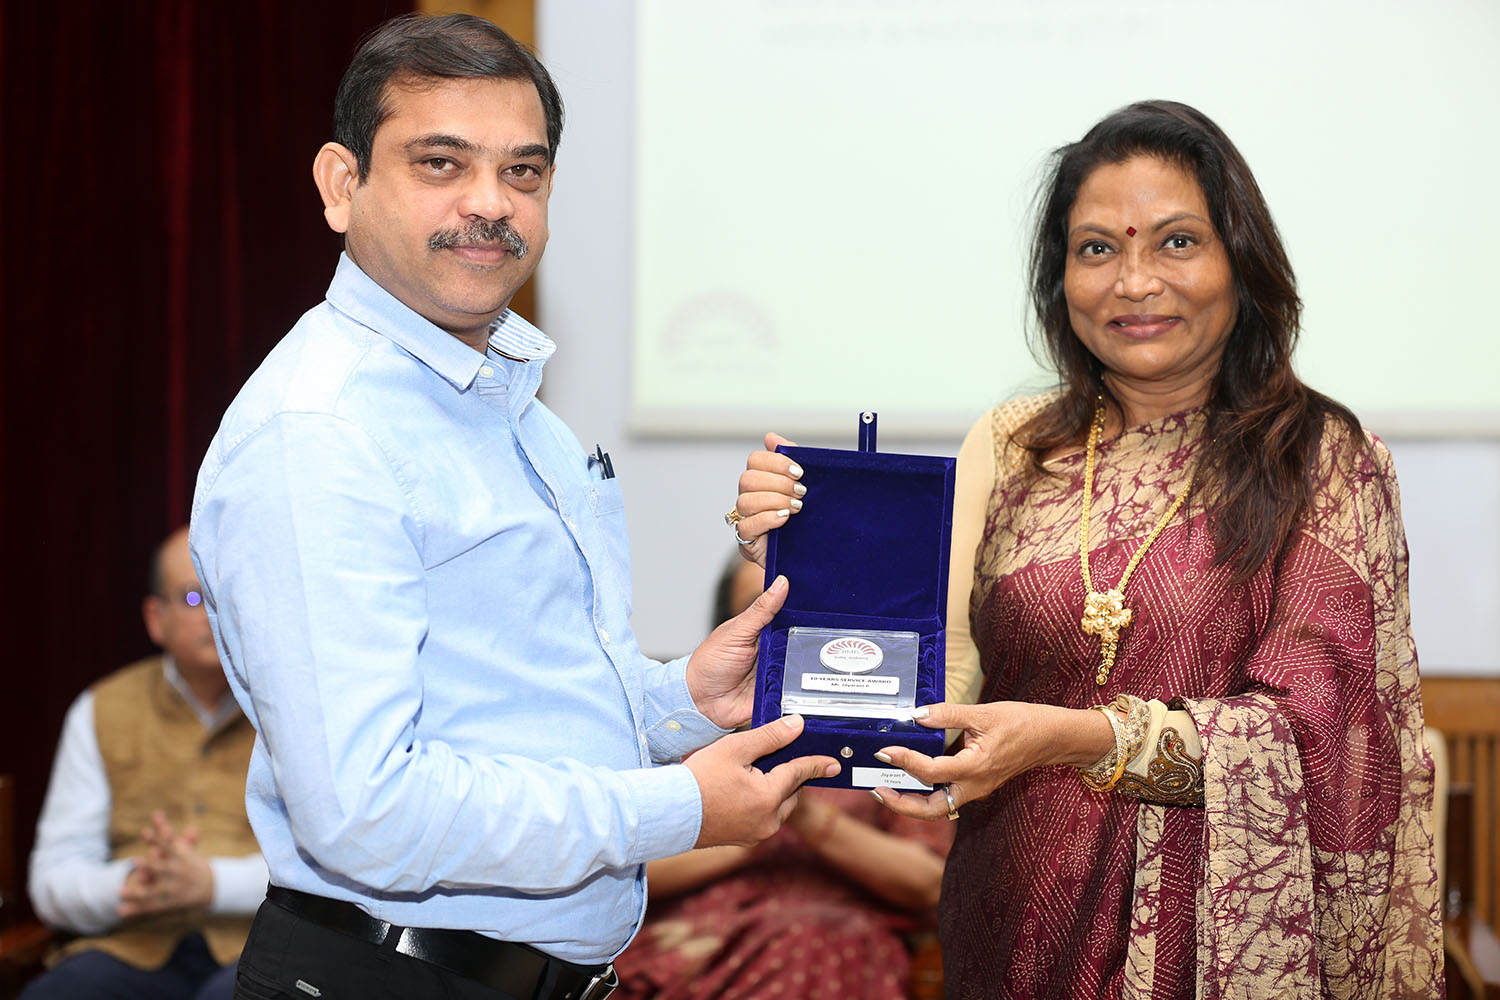 Mr Jayaram P, Assistant Manager, Computer Centre, receives the award for 10 years of service from Ms. Kalpana Saroj, Member of the Board of Governors, IIMB, during the institute’s 49th Foundation Day celebrations.